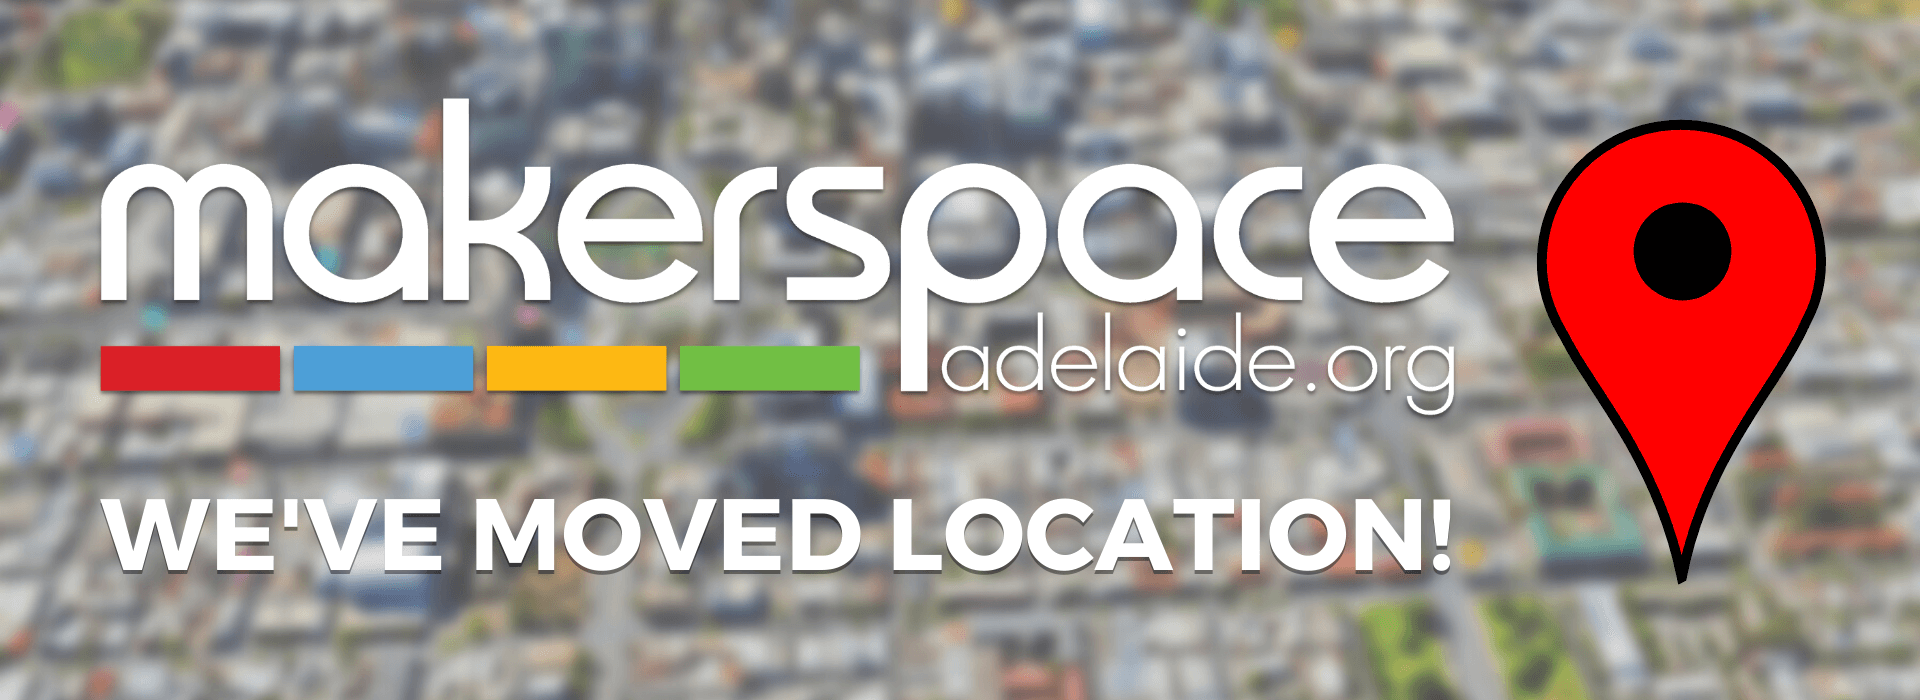 Makerspace Adelaide's new home is 223 Angas Street!